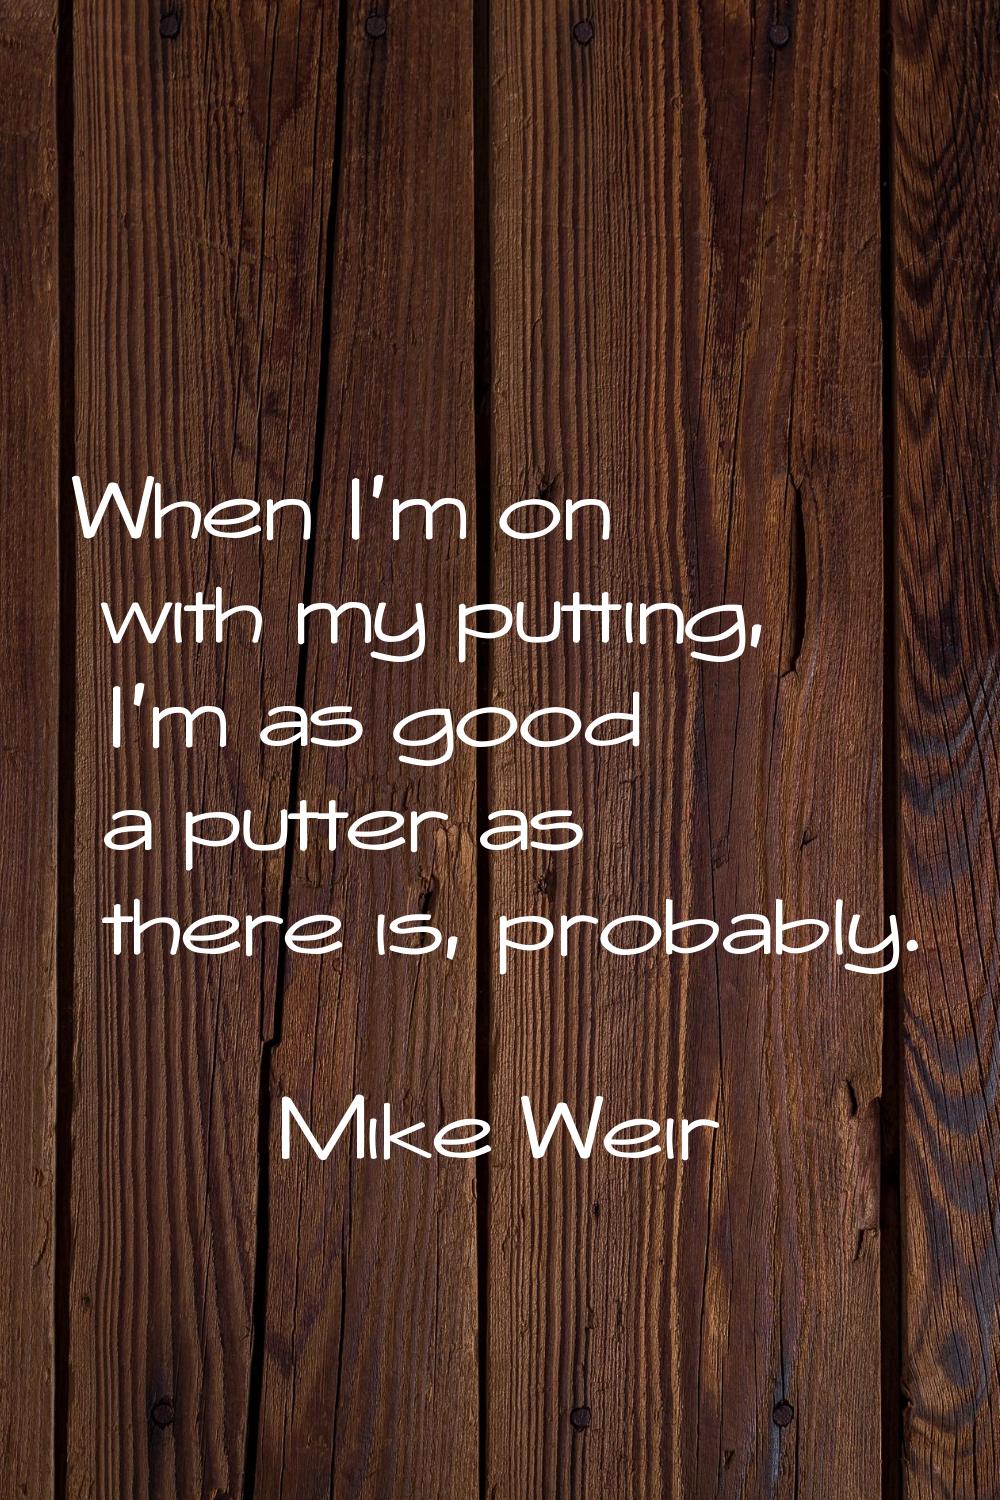 When I'm on with my putting, I'm as good a putter as there is, probably.